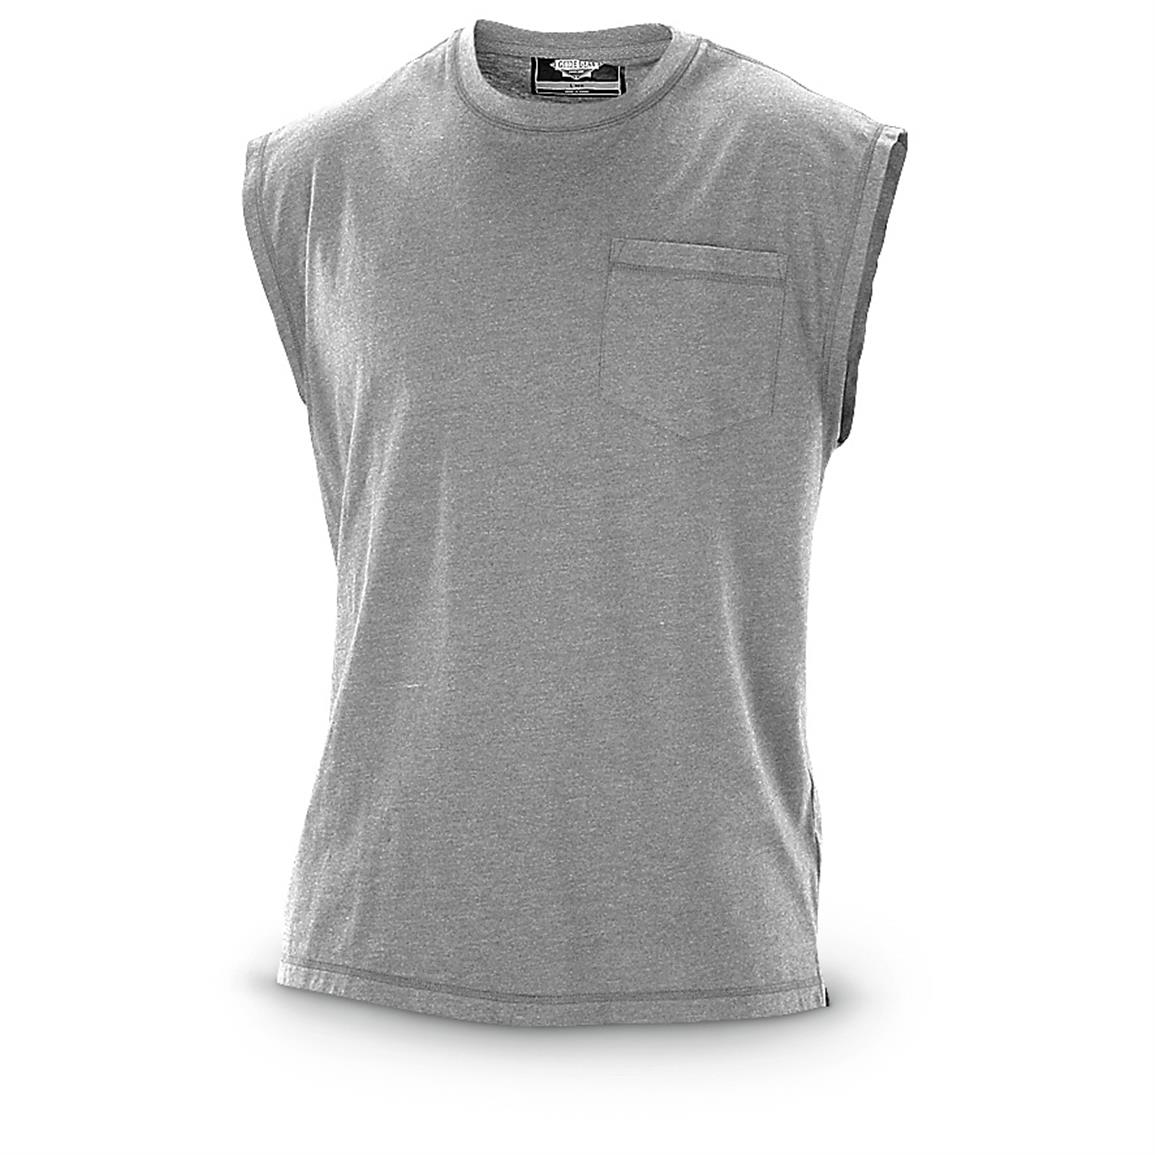 Guide Gear Sleeveless Work Pocket T-shirt - 621479, T-Shirts at Sportsman's Guide